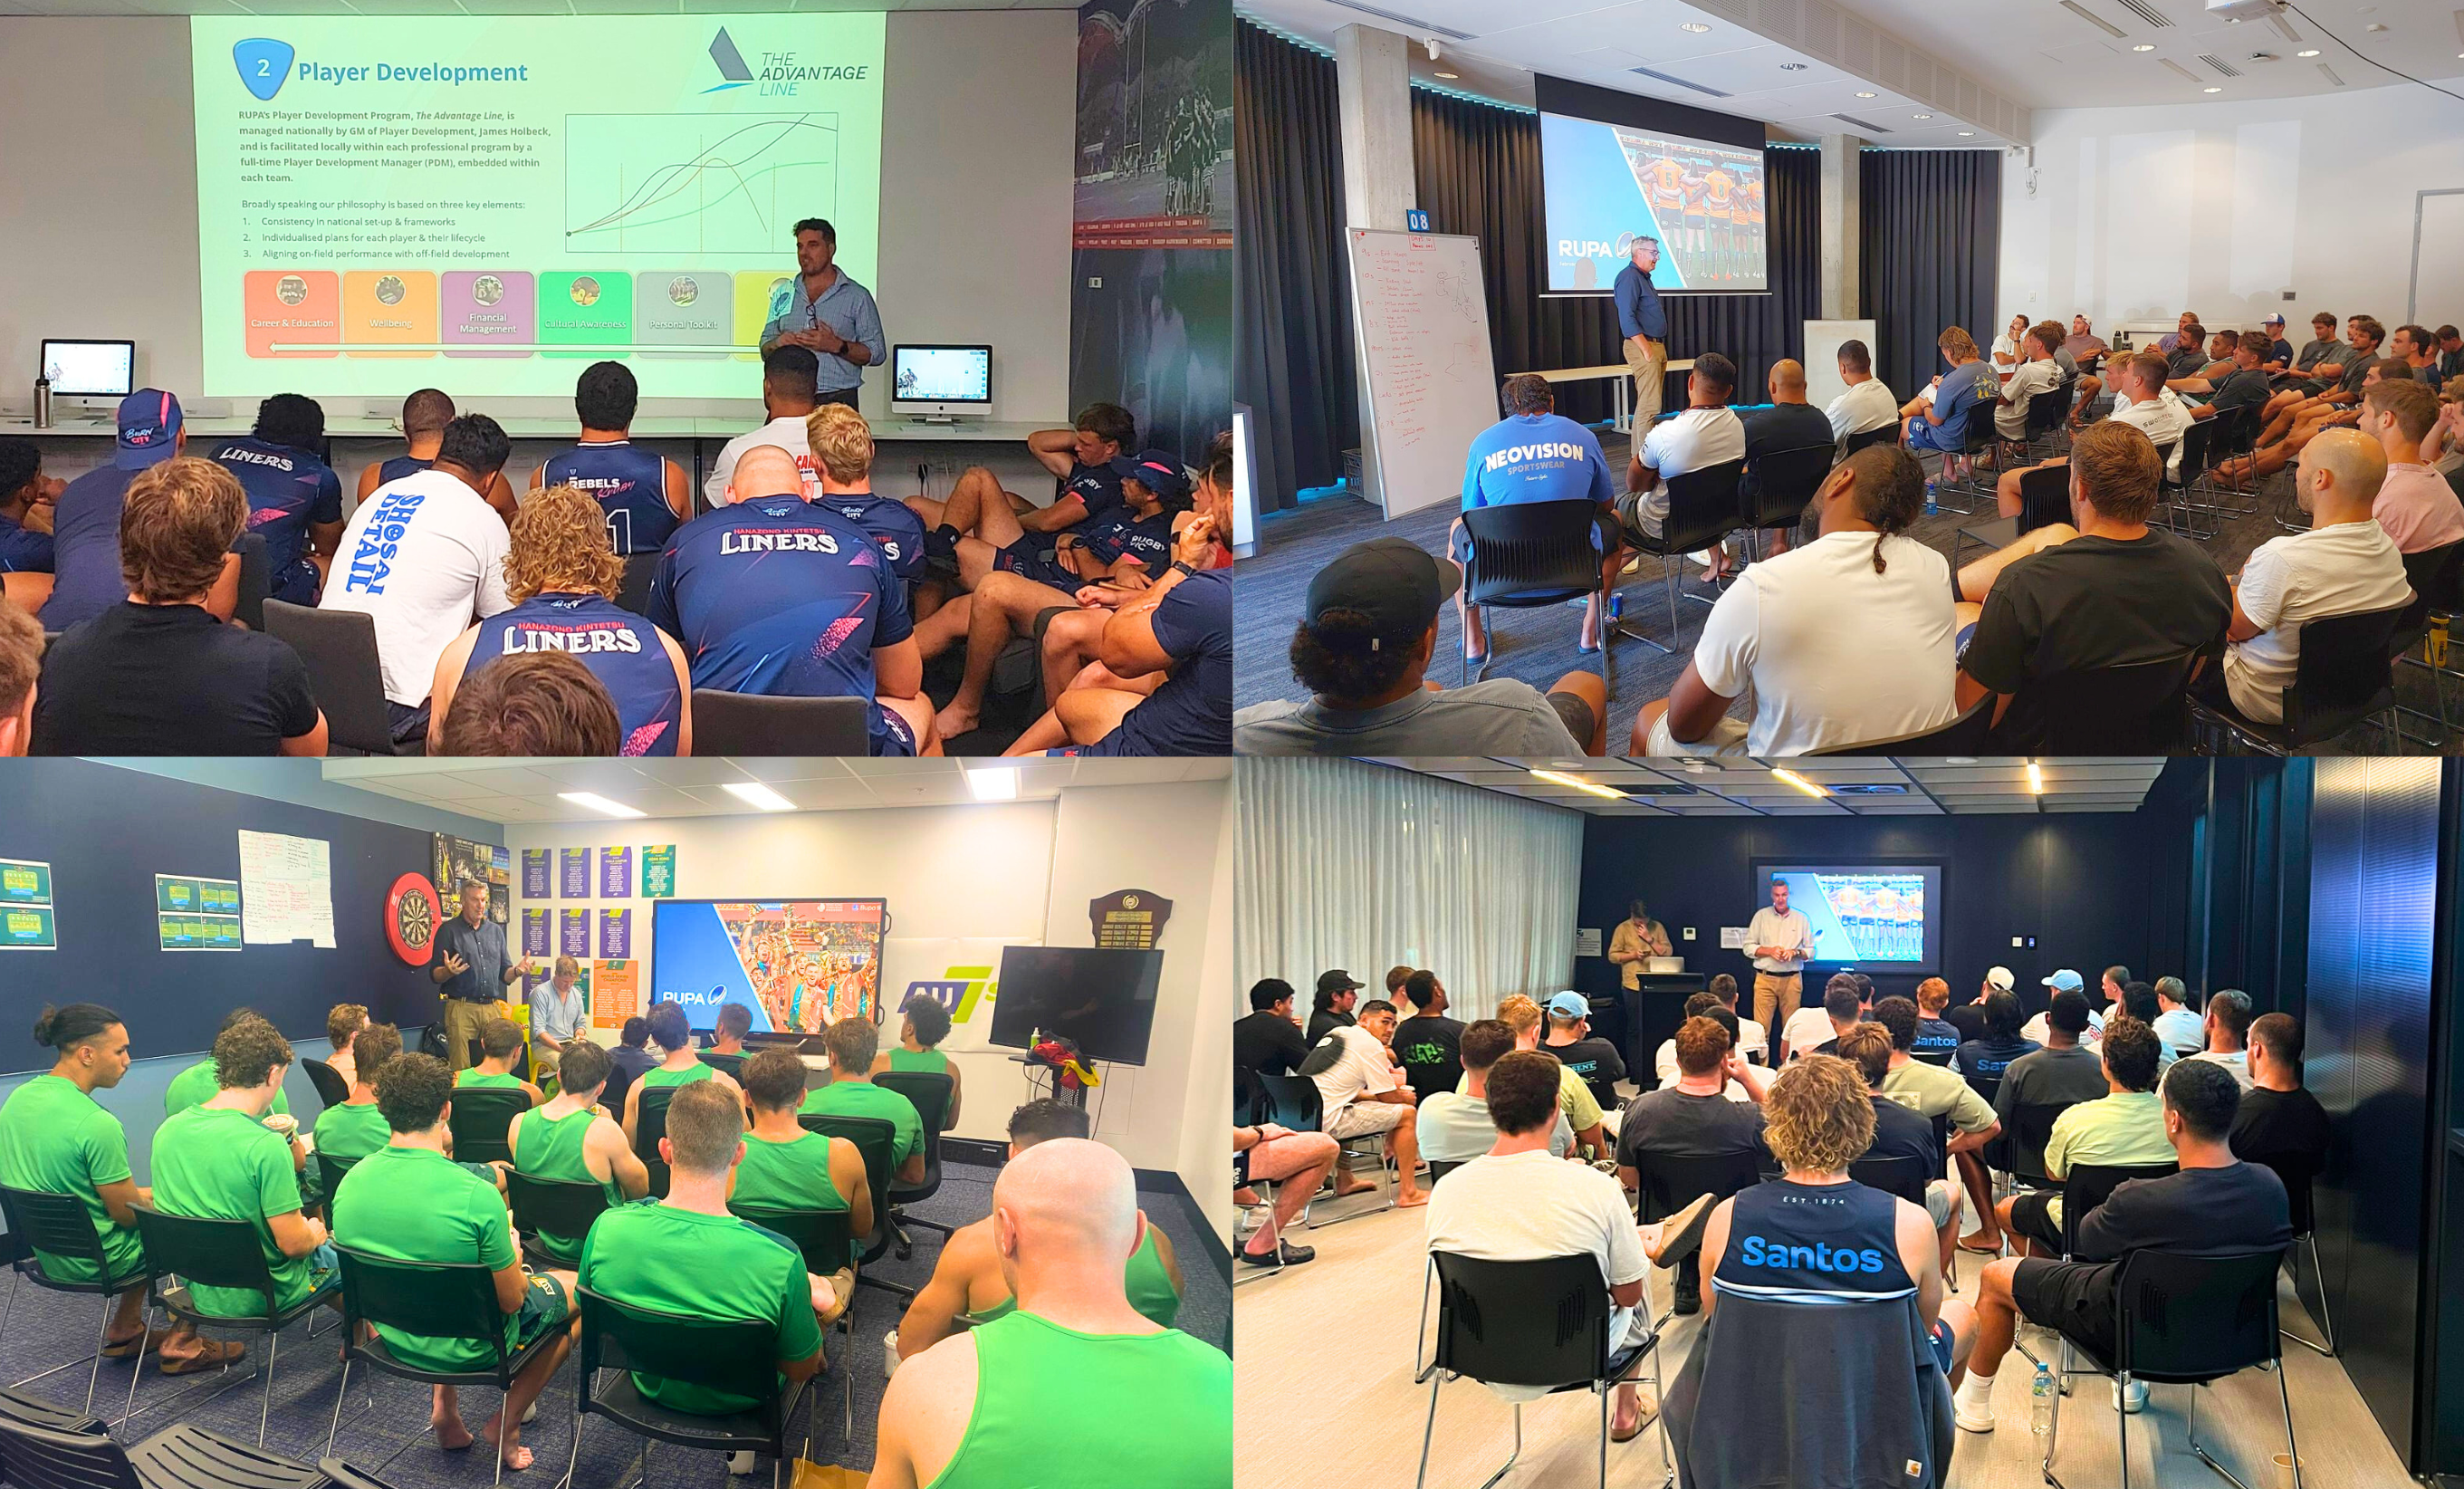 RUPA CEO, Justin Harrison, RUPA General Manager - Player Development, James Holbeck, and RUPA General Manager - Player Services & Operations Alex Grygiel, have completed their journey around Australia, spreading meaningful RUPA updates to each Super Rugby Club.